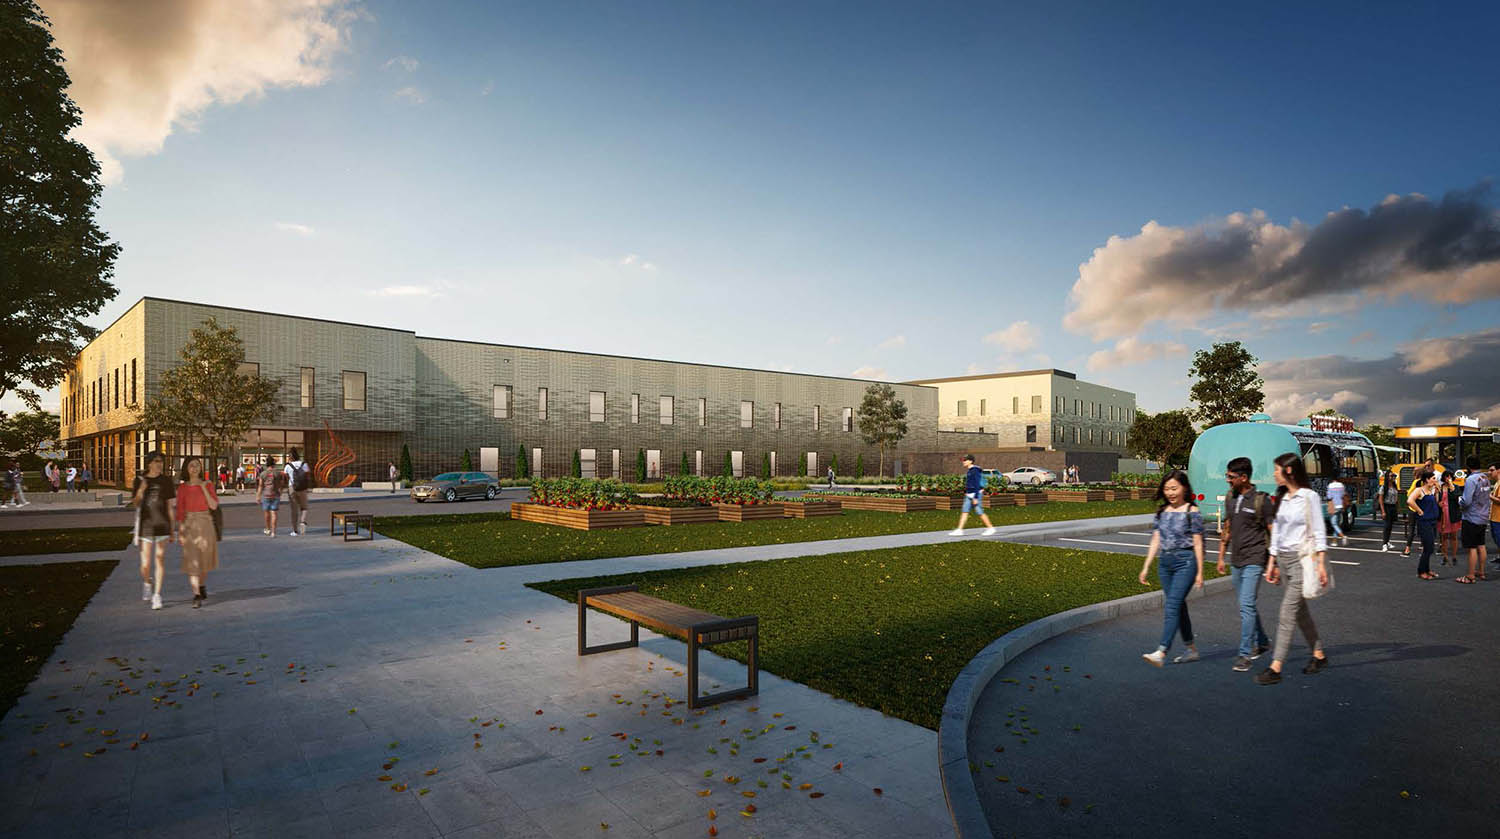 Rendering of Oso Creek Campus with students outdoors